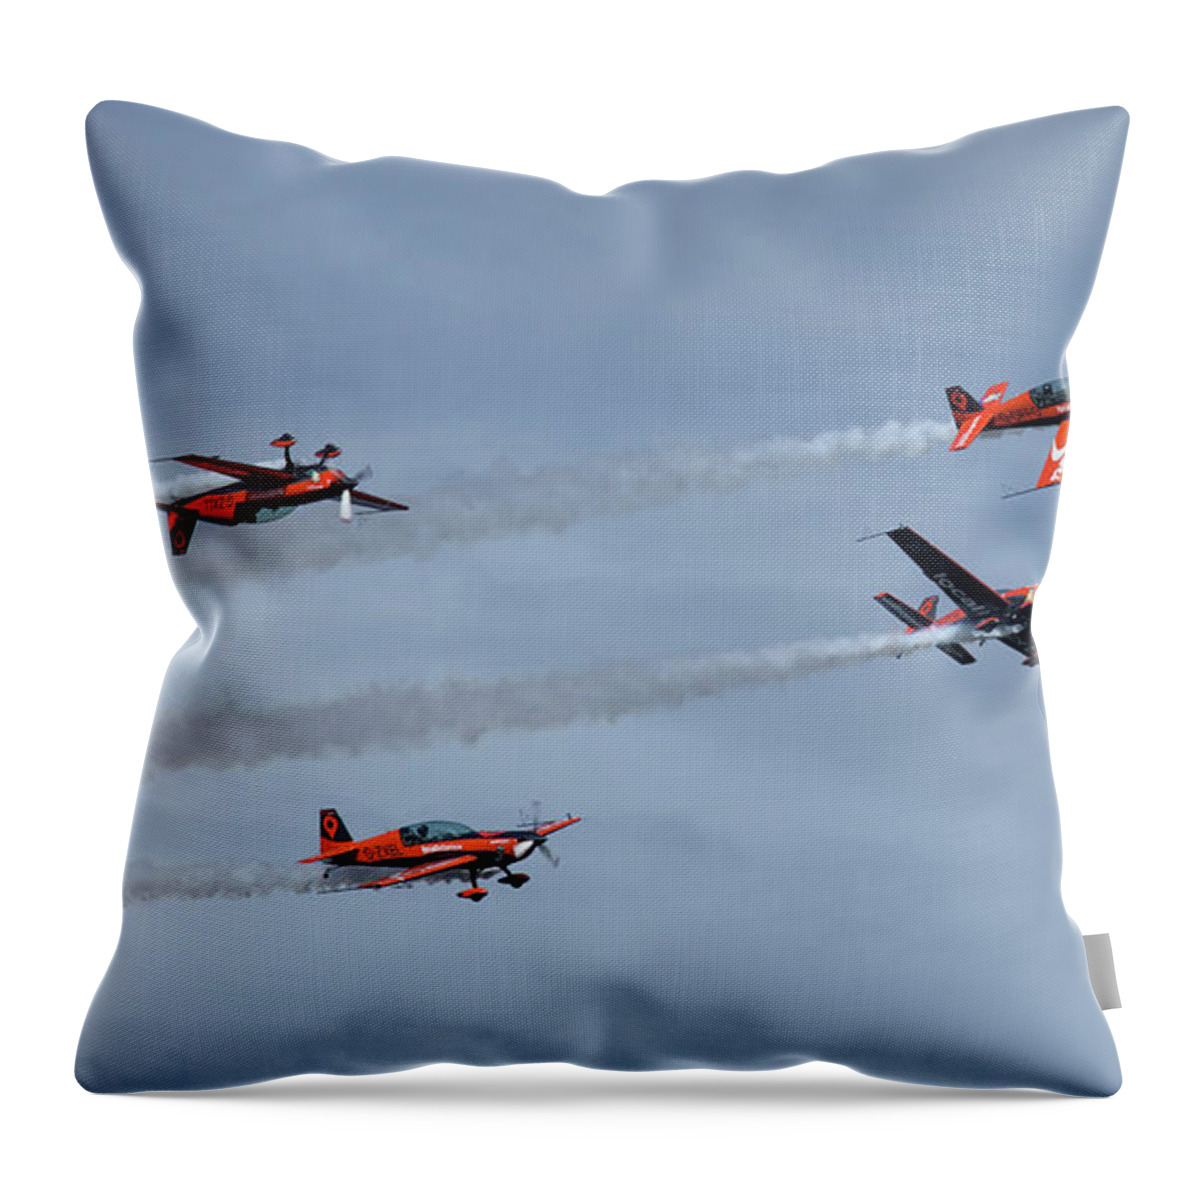 The Blades Throw Pillow featuring the photograph The Blades by Smart Aviation